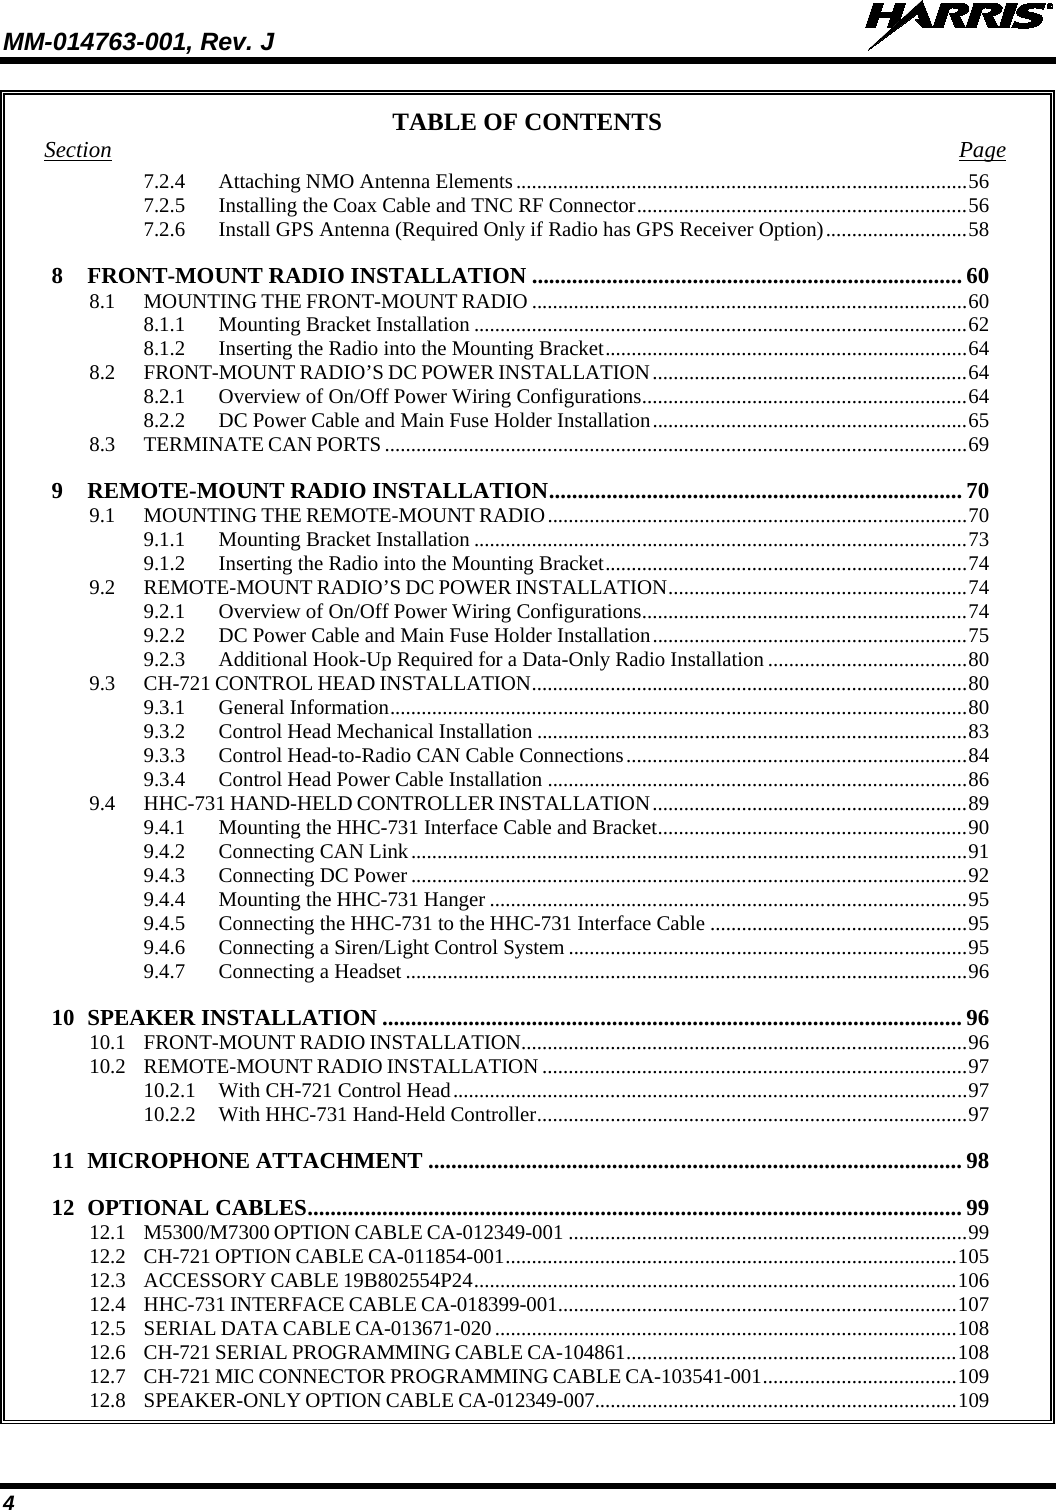 MM-014763-001, Rev. J   4 TABLE OF CONTENTS Section Page 7.2.4 Attaching NMO Antenna Elements ...................................................................................... 56 7.2.5 Installing the Coax Cable and TNC RF Connector ............................................................... 56 7.2.6 Install GPS Antenna (Required Only if Radio has GPS Receiver Option) ........................... 58 8 FRONT-MOUNT RADIO INSTALLATION ........................................................................... 60 8.1 MOUNTING THE FRONT-MOUNT RADIO ................................................................................... 60 8.1.1 Mounting Bracket Installation .............................................................................................. 62 8.1.2 Inserting the Radio into the Mounting Bracket ..................................................................... 64 8.2 FRONT-MOUNT RADIO’S DC POWER INSTALLATION ............................................................ 64 8.2.1 Overview of On/Off Power Wiring Configurations .............................................................. 64 8.2.2 DC Power Cable and Main Fuse Holder Installation ............................................................ 65 8.3 TERMINATE CAN PORTS ............................................................................................................... 69 9 REMOTE-MOUNT RADIO INSTALLATION ........................................................................ 70 9.1 MOUNTING THE REMOTE-MOUNT RADIO ................................................................................ 70 9.1.1 Mounting Bracket Installation .............................................................................................. 73 9.1.2 Inserting the Radio into the Mounting Bracket ..................................................................... 74 9.2 REMOTE-MOUNT RADIO’S DC POWER INSTALLATION ......................................................... 74 9.2.1 Overview of On/Off Power Wiring Configurations .............................................................. 74 9.2.2 DC Power Cable and Main Fuse Holder Installation ............................................................ 75 9.2.3 Additional Hook-Up Required for a Data-Only Radio Installation ...................................... 80 9.3 CH-721 CONTROL HEAD INSTALLATION ................................................................................... 80 9.3.1 General Information .............................................................................................................. 80 9.3.2 Control Head Mechanical Installation .................................................................................. 83 9.3.3 Control Head-to-Radio CAN Cable Connections ................................................................. 84 9.3.4 Control Head Power Cable Installation ................................................................................ 86 9.4 HHC-731 HAND-HELD CONTROLLER INSTALLATION ............................................................ 89 9.4.1 Mounting the HHC-731 Interface Cable and Bracket ........................................................... 90 9.4.2 Connecting CAN Link .......................................................................................................... 91 9.4.3 Connecting DC Power .......................................................................................................... 92 9.4.4 Mounting the HHC-731 Hanger ........................................................................................... 95 9.4.5 Connecting the HHC-731 to the HHC-731 Interface Cable ................................................. 95 9.4.6 Connecting a Siren/Light Control System ............................................................................ 95 9.4.7 Connecting a Headset ........................................................................................................... 96 10 SPEAKER INSTALLATION ..................................................................................................... 96 10.1 FRONT-MOUNT RADIO INSTALLATION ..................................................................................... 96 10.2 REMOTE-MOUNT RADIO INSTALLATION ................................................................................. 97 10.2.1 With CH-721 Control Head .................................................................................................. 97 10.2.2 With HHC-731 Hand-Held Controller .................................................................................. 97 11 MICROPHONE ATTACHMENT ............................................................................................. 98 12 OPTIONAL CABLES .................................................................................................................. 99 12.1 M5300/M7300 OPTION CABLE CA-012349-001 ............................................................................ 99 12.2 CH-721 OPTION CABLE CA-011854-001 ...................................................................................... 105 12.3 ACCESSORY CABLE 19B802554P24 ............................................................................................ 106 12.4 HHC-731 INTERFACE CABLE CA-018399-001 ............................................................................ 107 12.5 SERIAL DATA CABLE CA-013671-020 ........................................................................................ 108 12.6 CH-721 SERIAL PROGRAMMING CABLE CA-104861 ............................................................... 108 12.7 CH-721 MIC CONNECTOR PROGRAMMING CABLE CA-103541-001 ..................................... 109 12.8 SPEAKER-ONLY OPTION CABLE CA-012349-007..................................................................... 109 